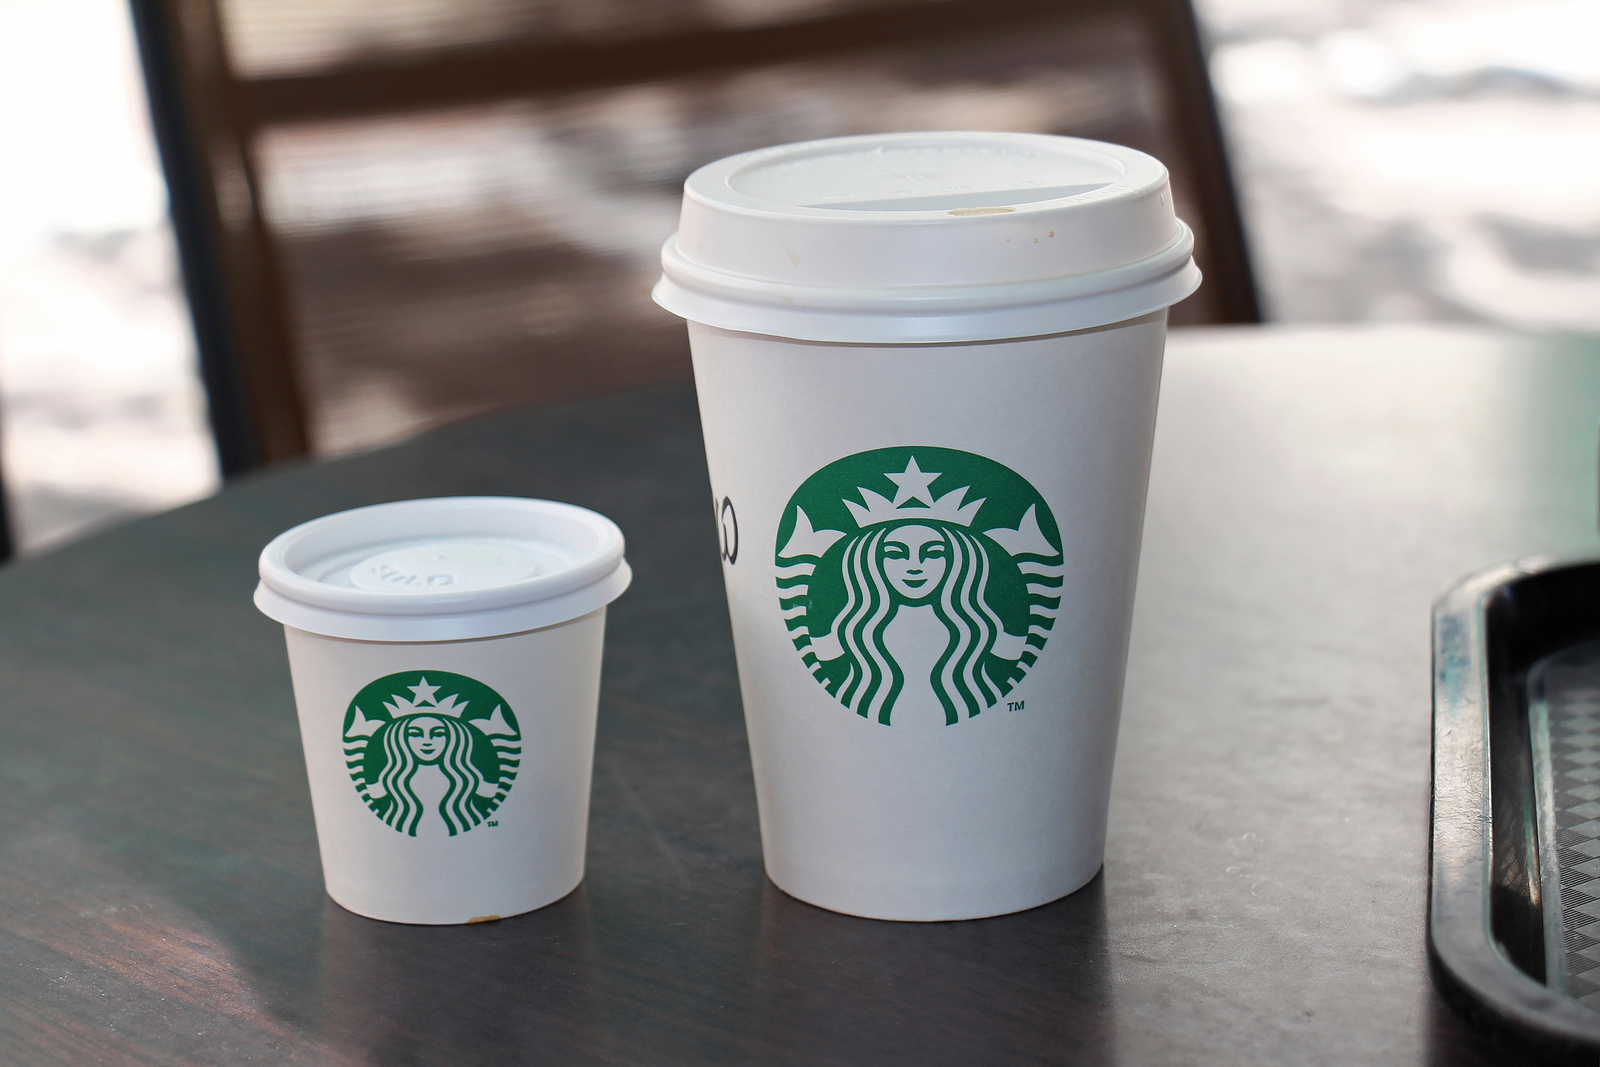 Starbucks drinks may contain as much as 25 teaspoons of sugar